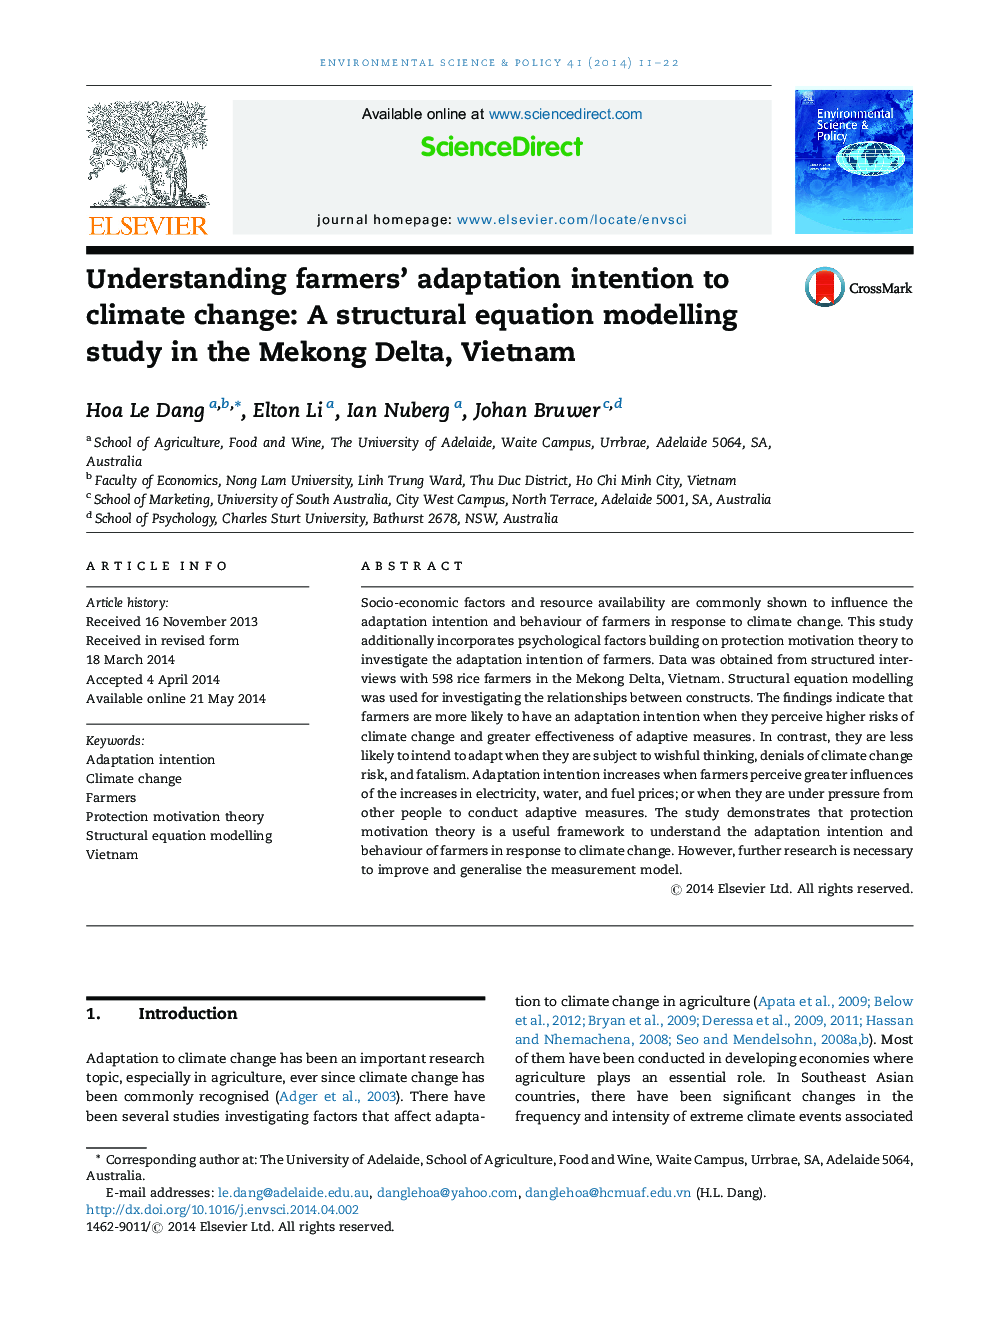 Understanding farmers’ adaptation intention to climate change: A structural equation modelling study in the Mekong Delta, Vietnam